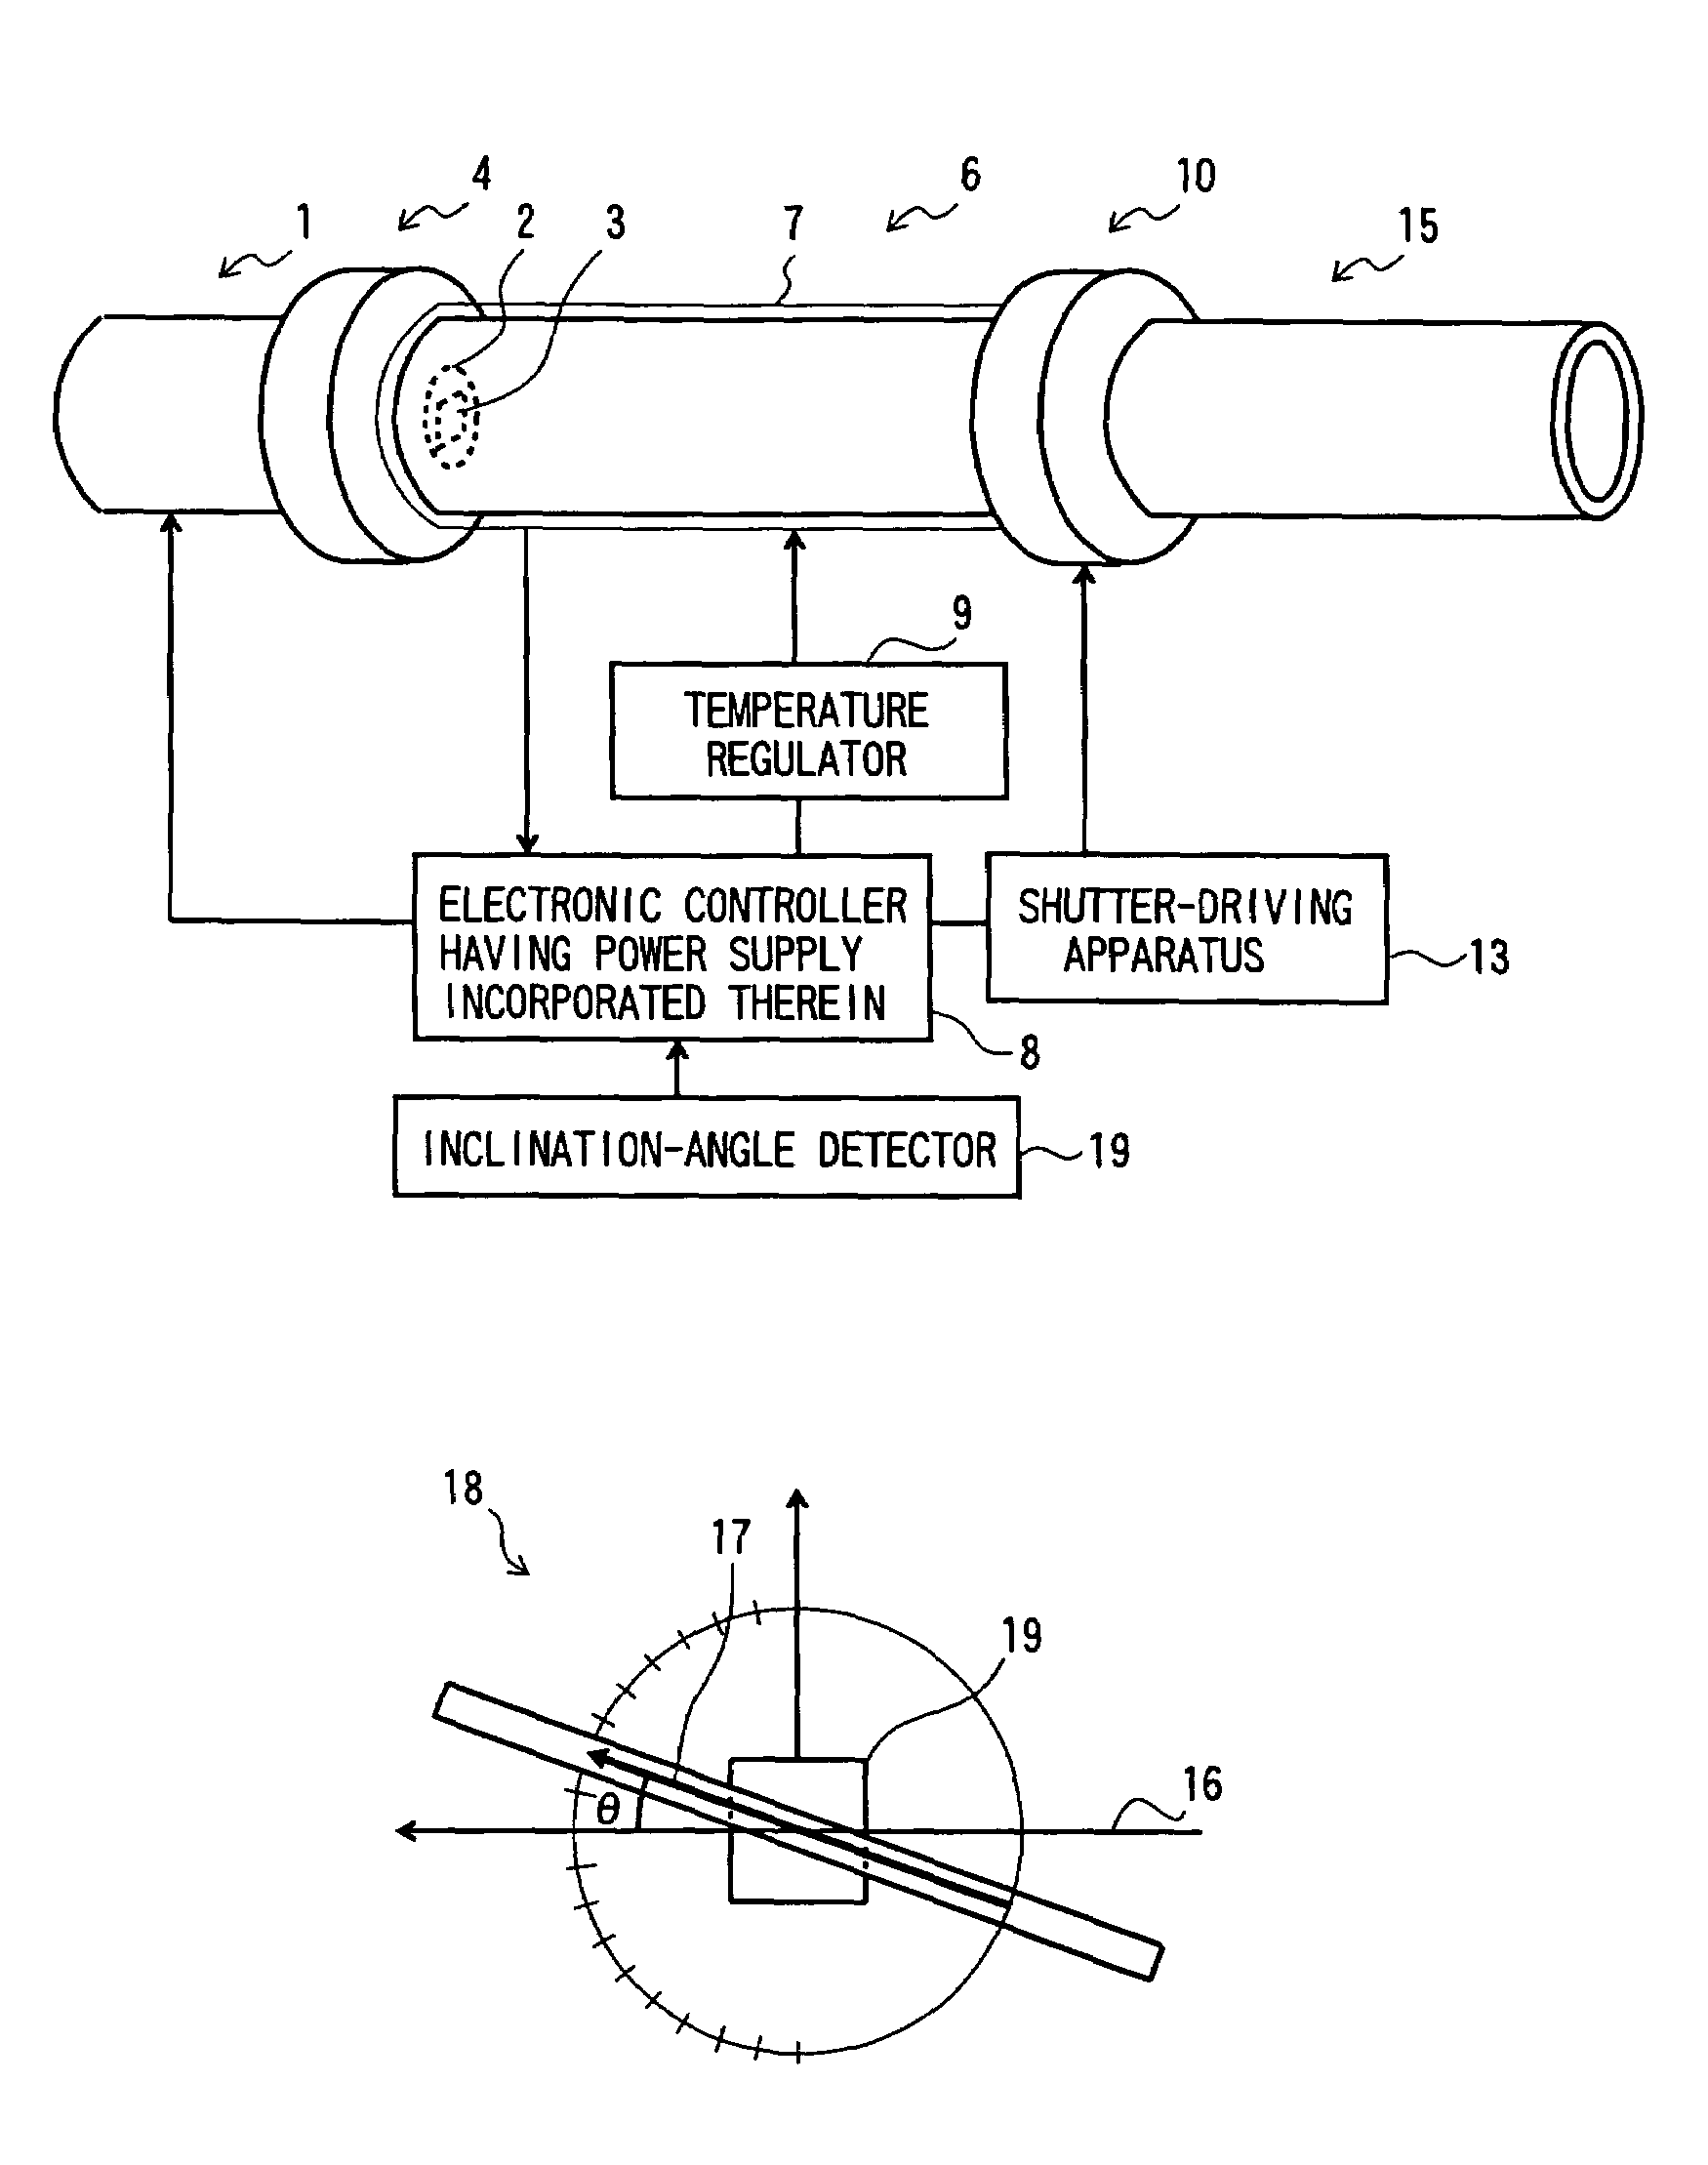 Method and device for preventing dew condensation and frosting on optical glass window